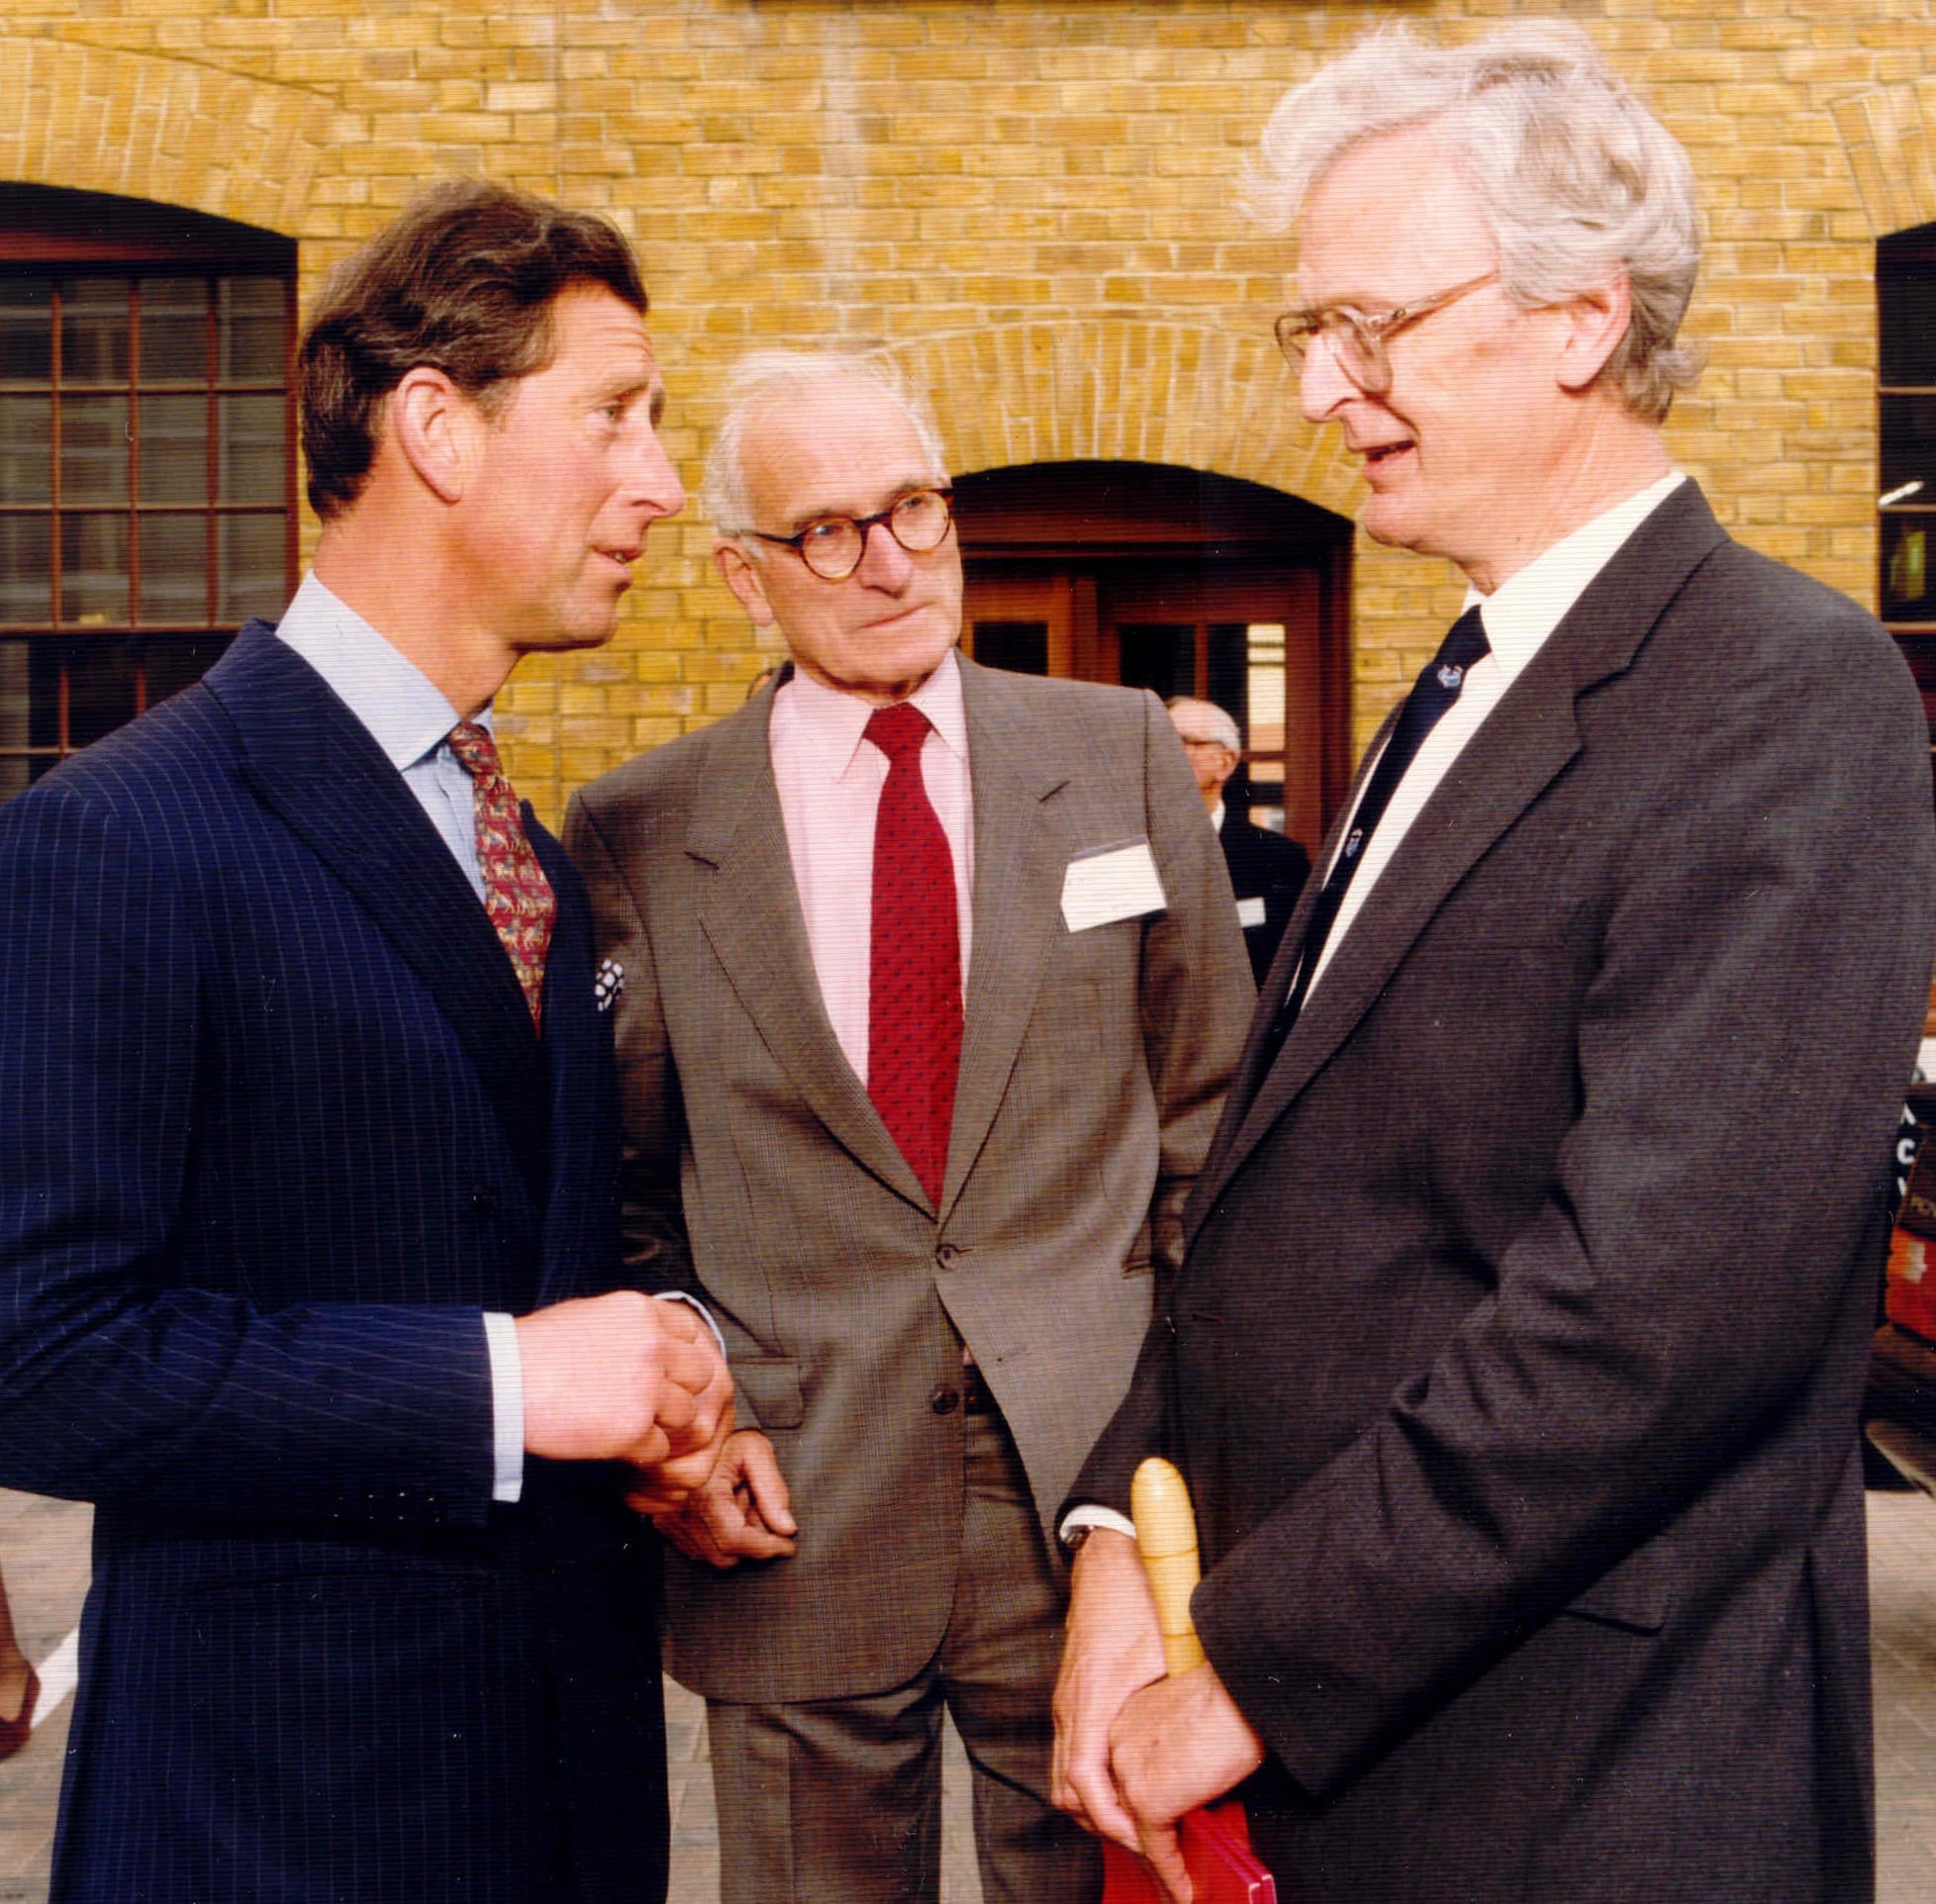 Brian Dodsworth, the charity's President, meeting Prince Charles